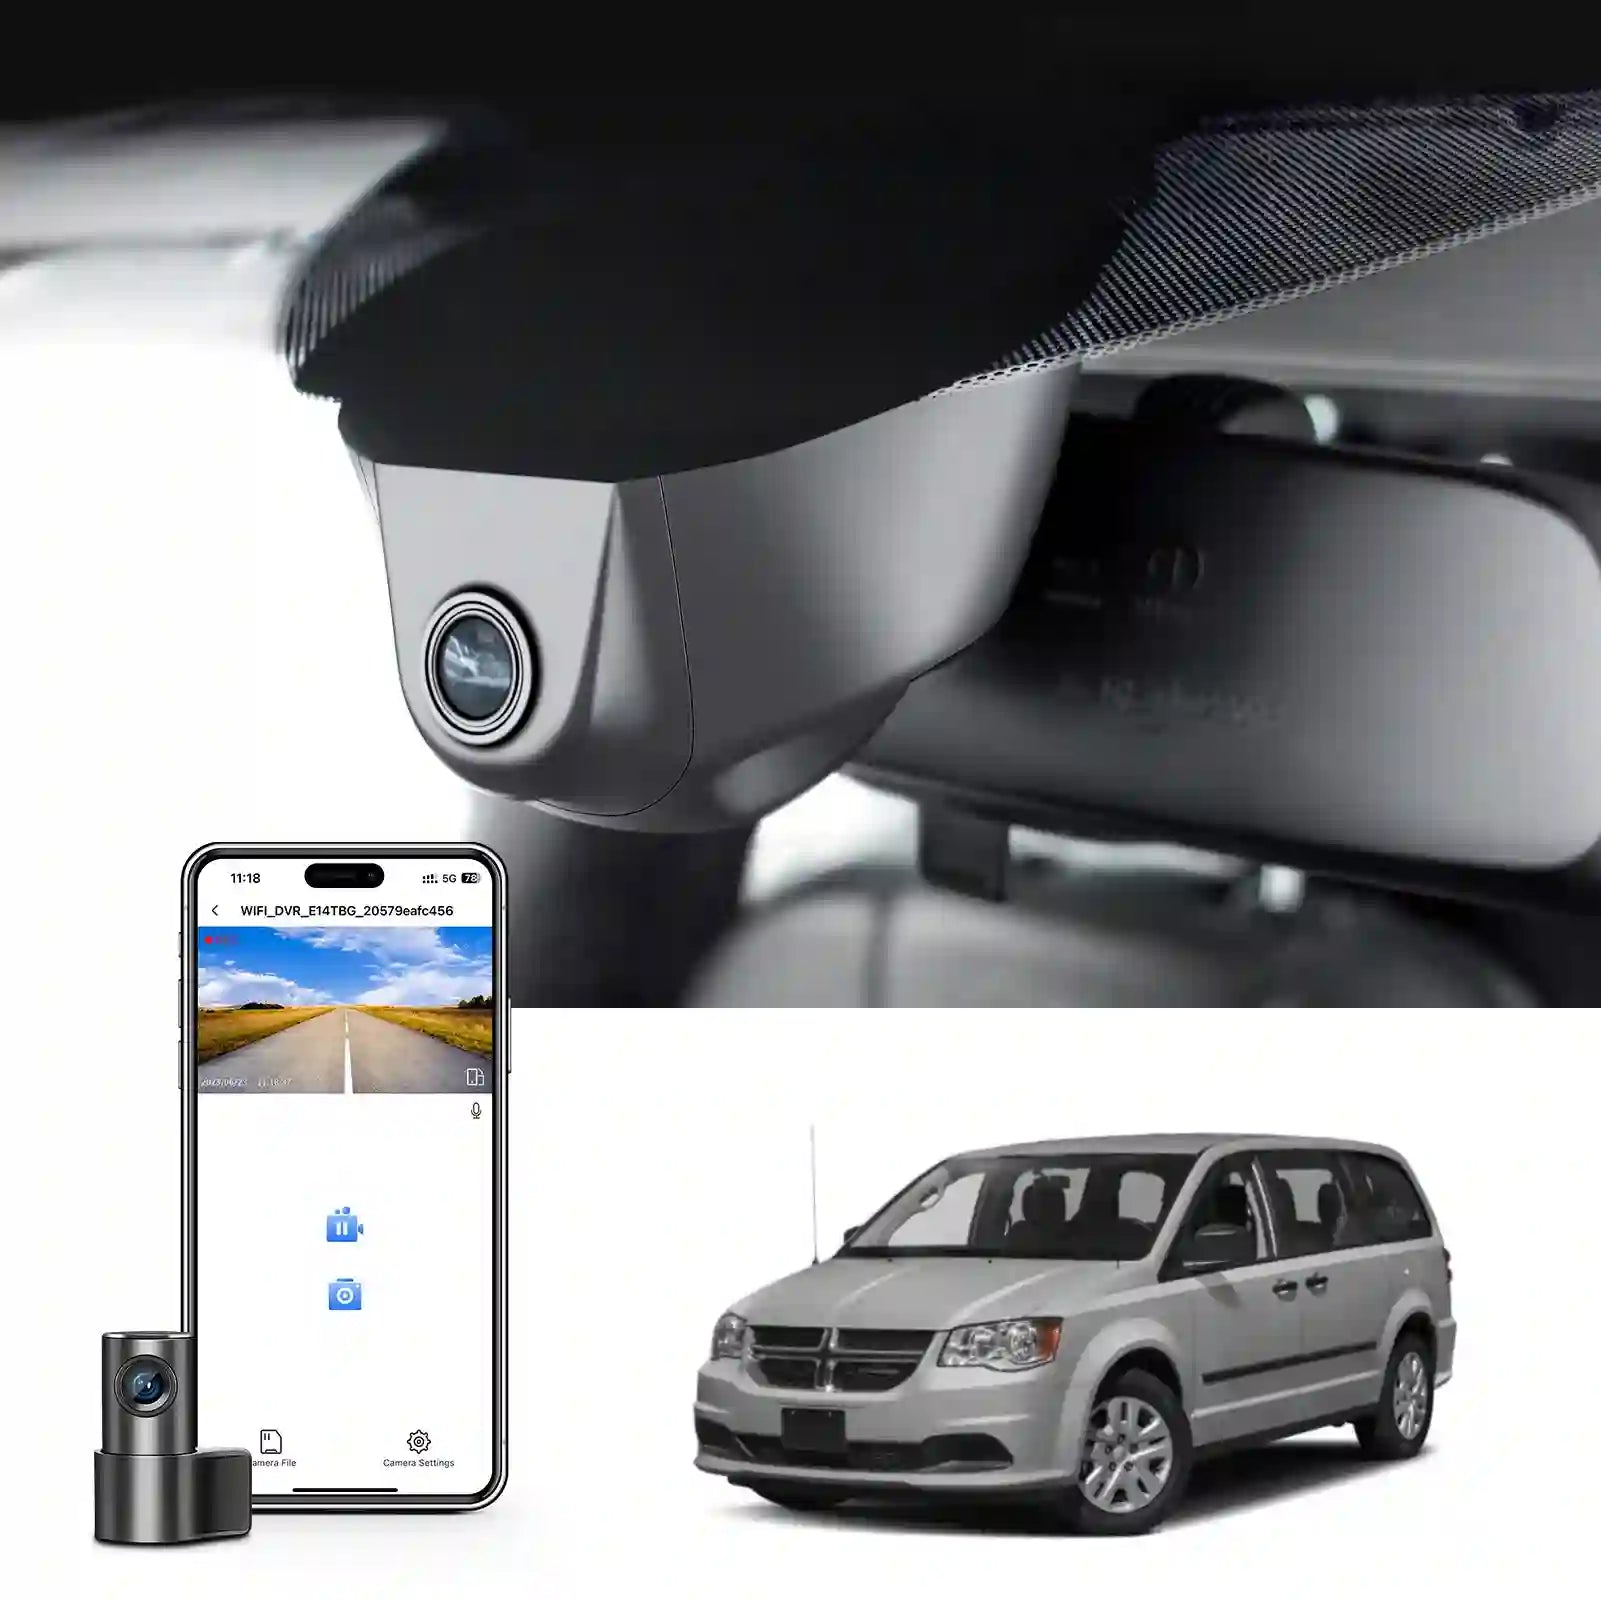 Front 4K & Rear 1080P Dash Cam Custom Fit for Dodge Grand Caravan 2018 2019 2020,GT SE SXT Accessories,Integrated OEM Look,UHD 2160P Video,App & WiFi,Loop Recording,128GB Card,Easy to Install